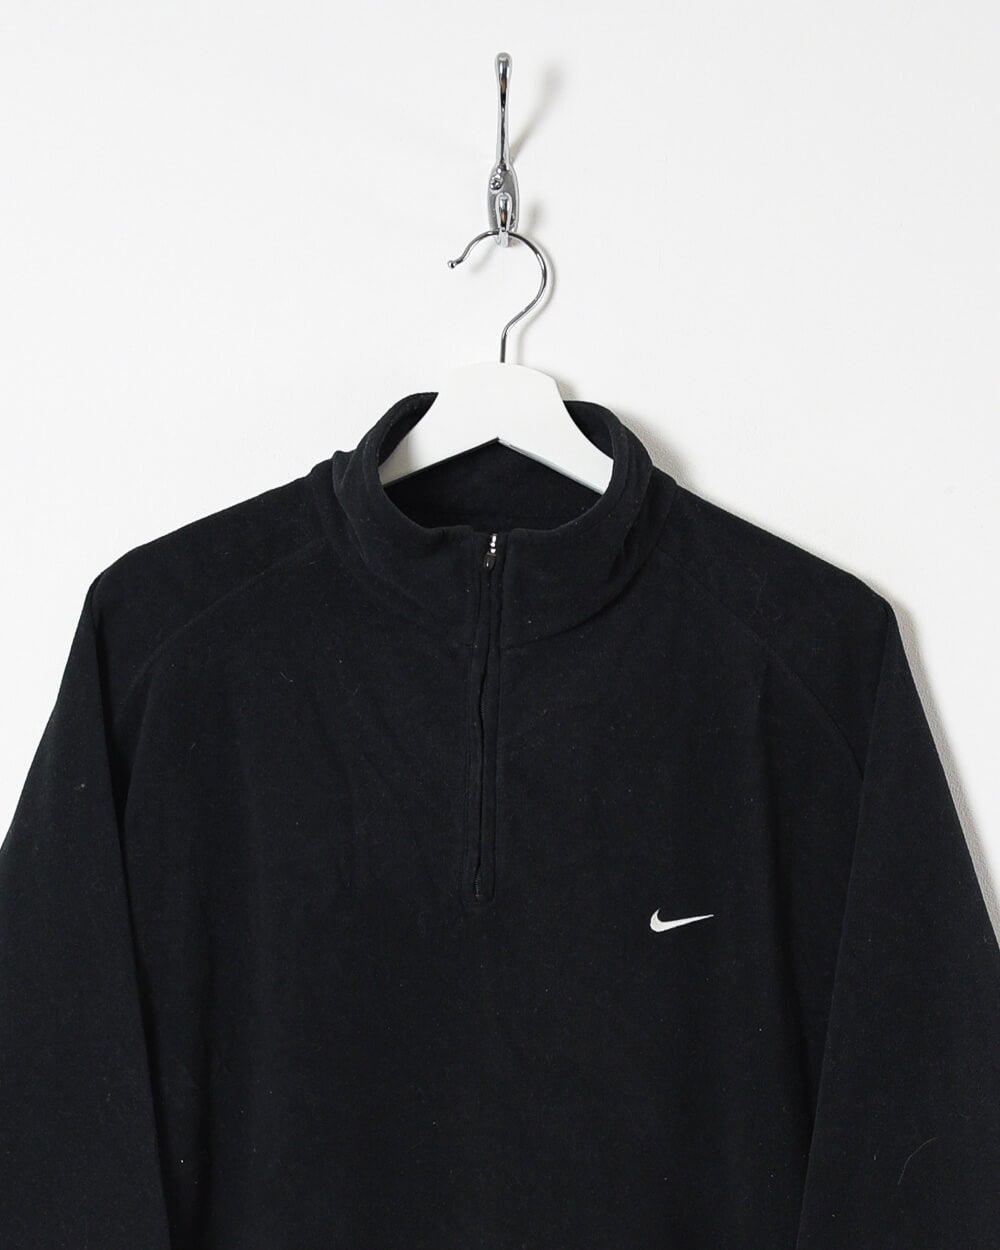 Nike Golf Therma Fit 1/4 Zip Fleece - X-Large - Domno Vintage 90s, 80s, 00s Retro and Vintage Clothing 